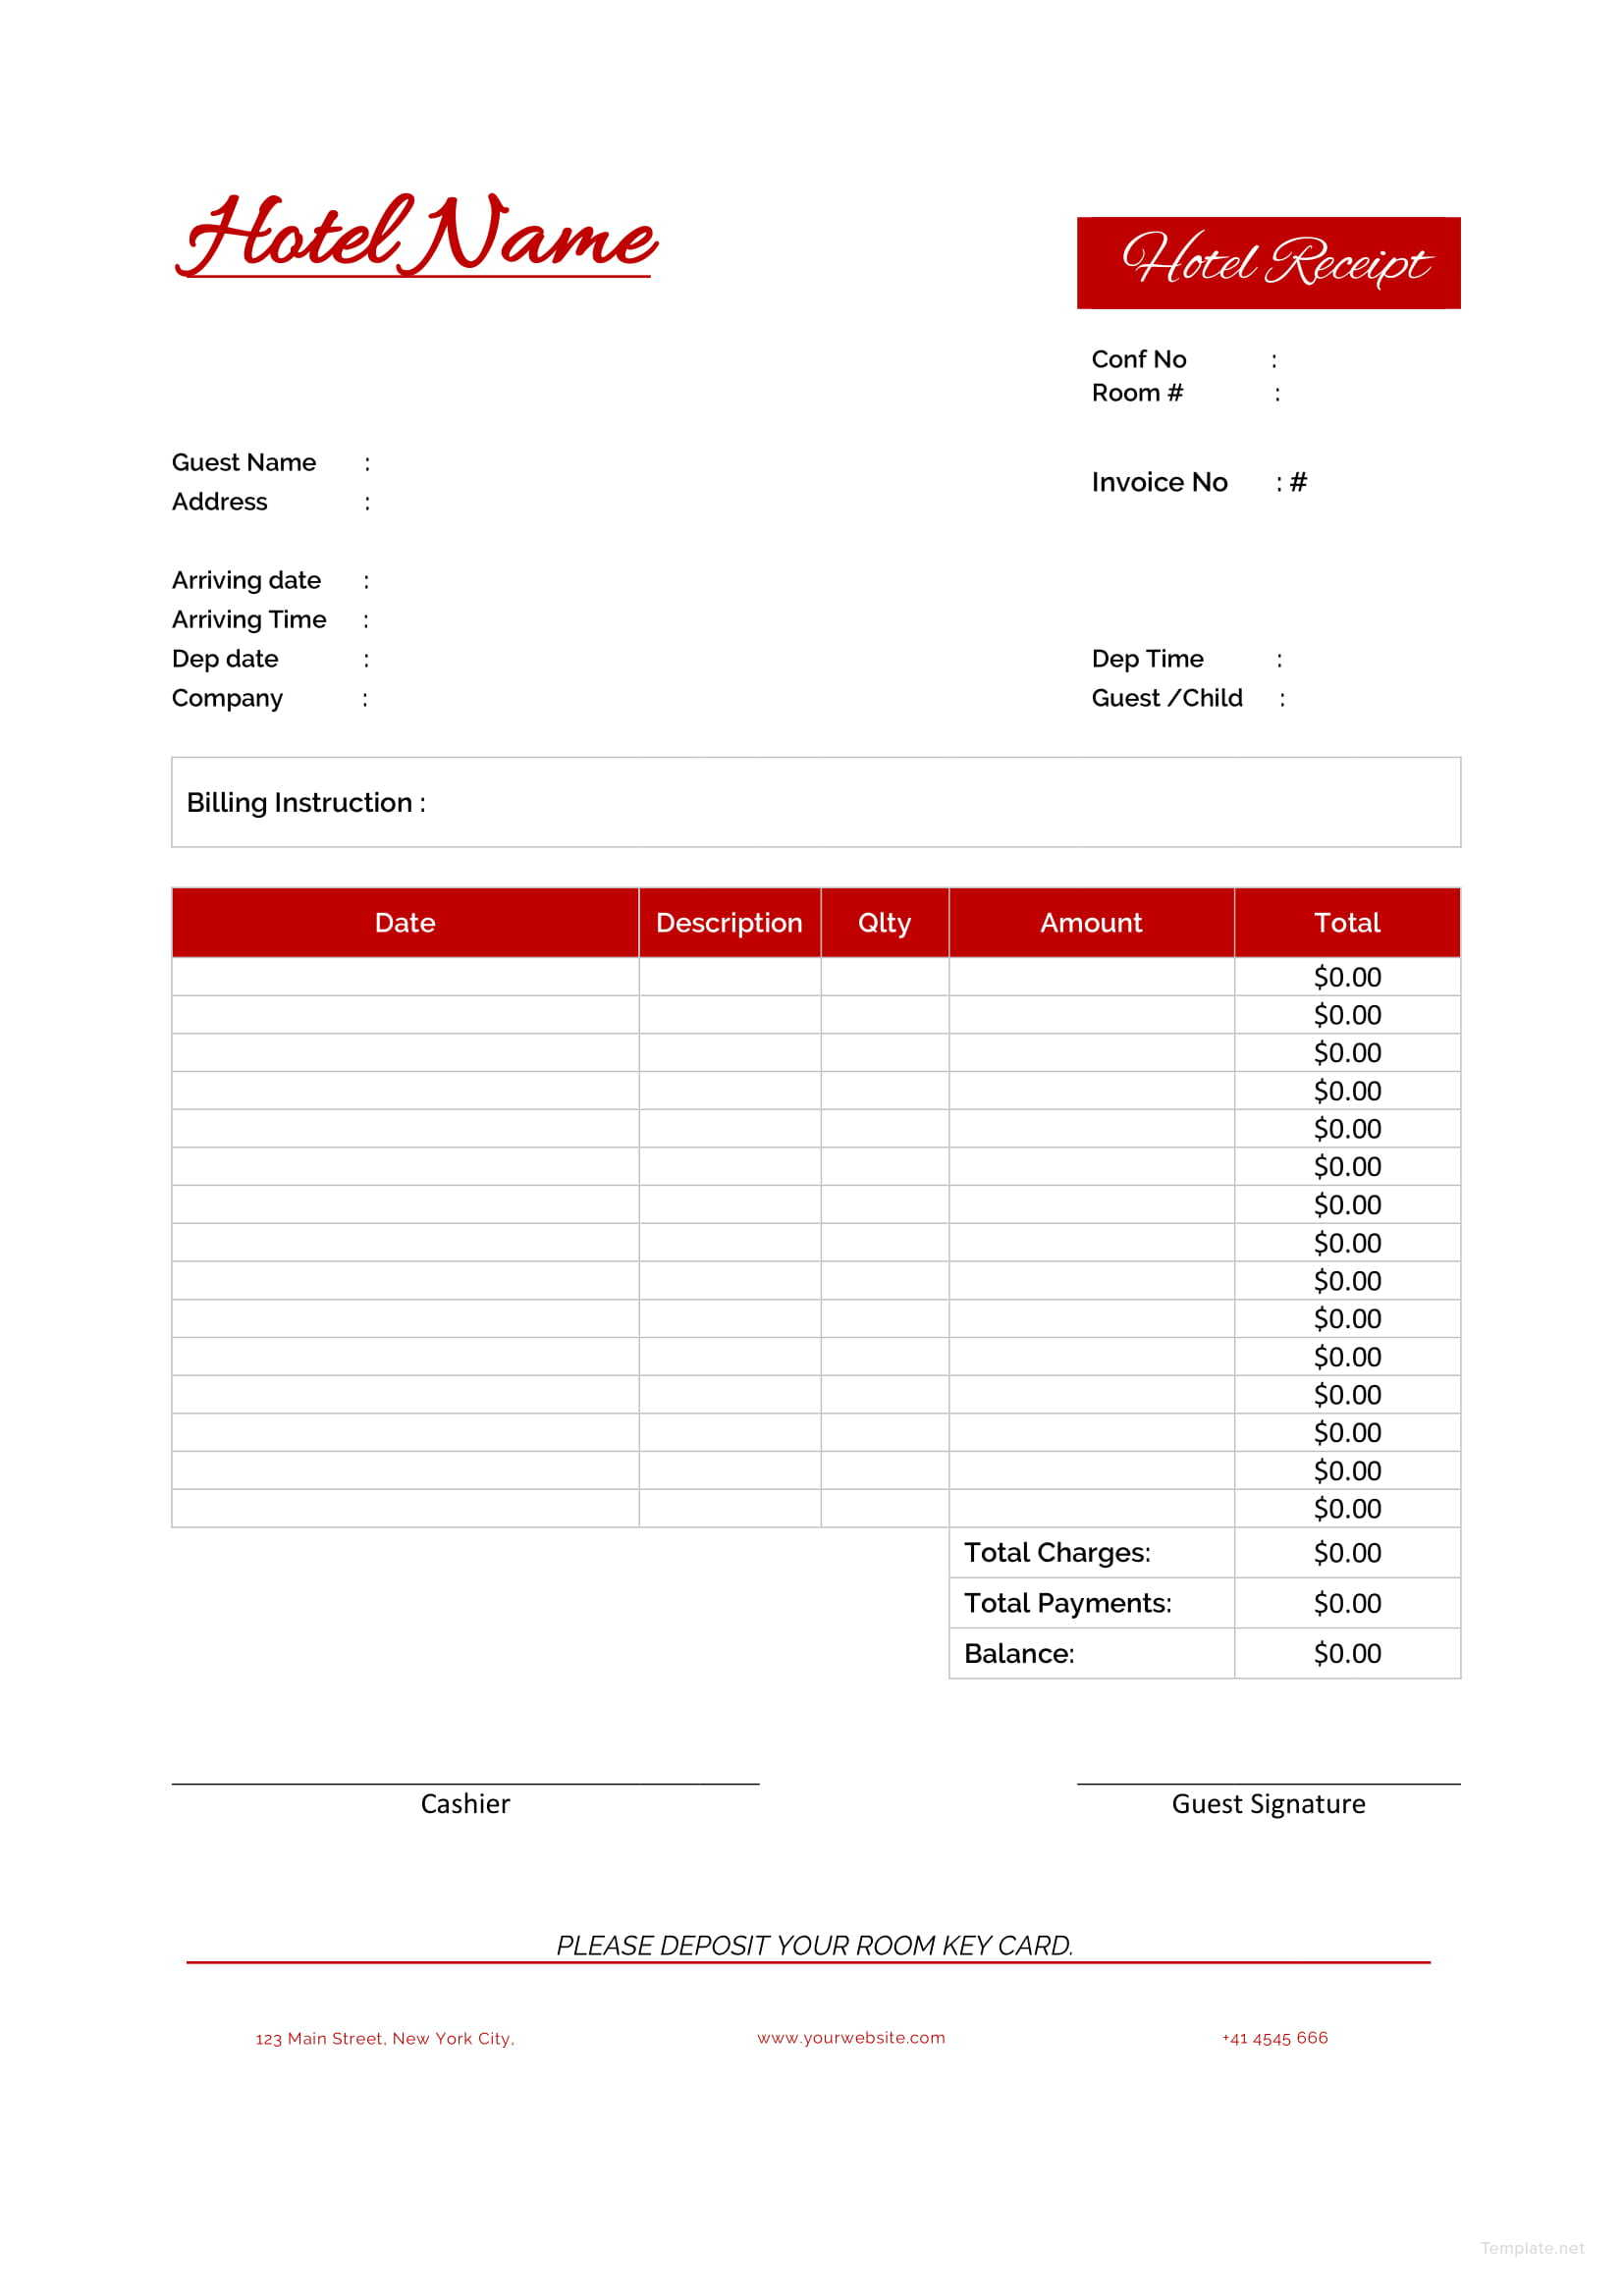 Hotel Receipt Template In Microsoft Word Excel Template